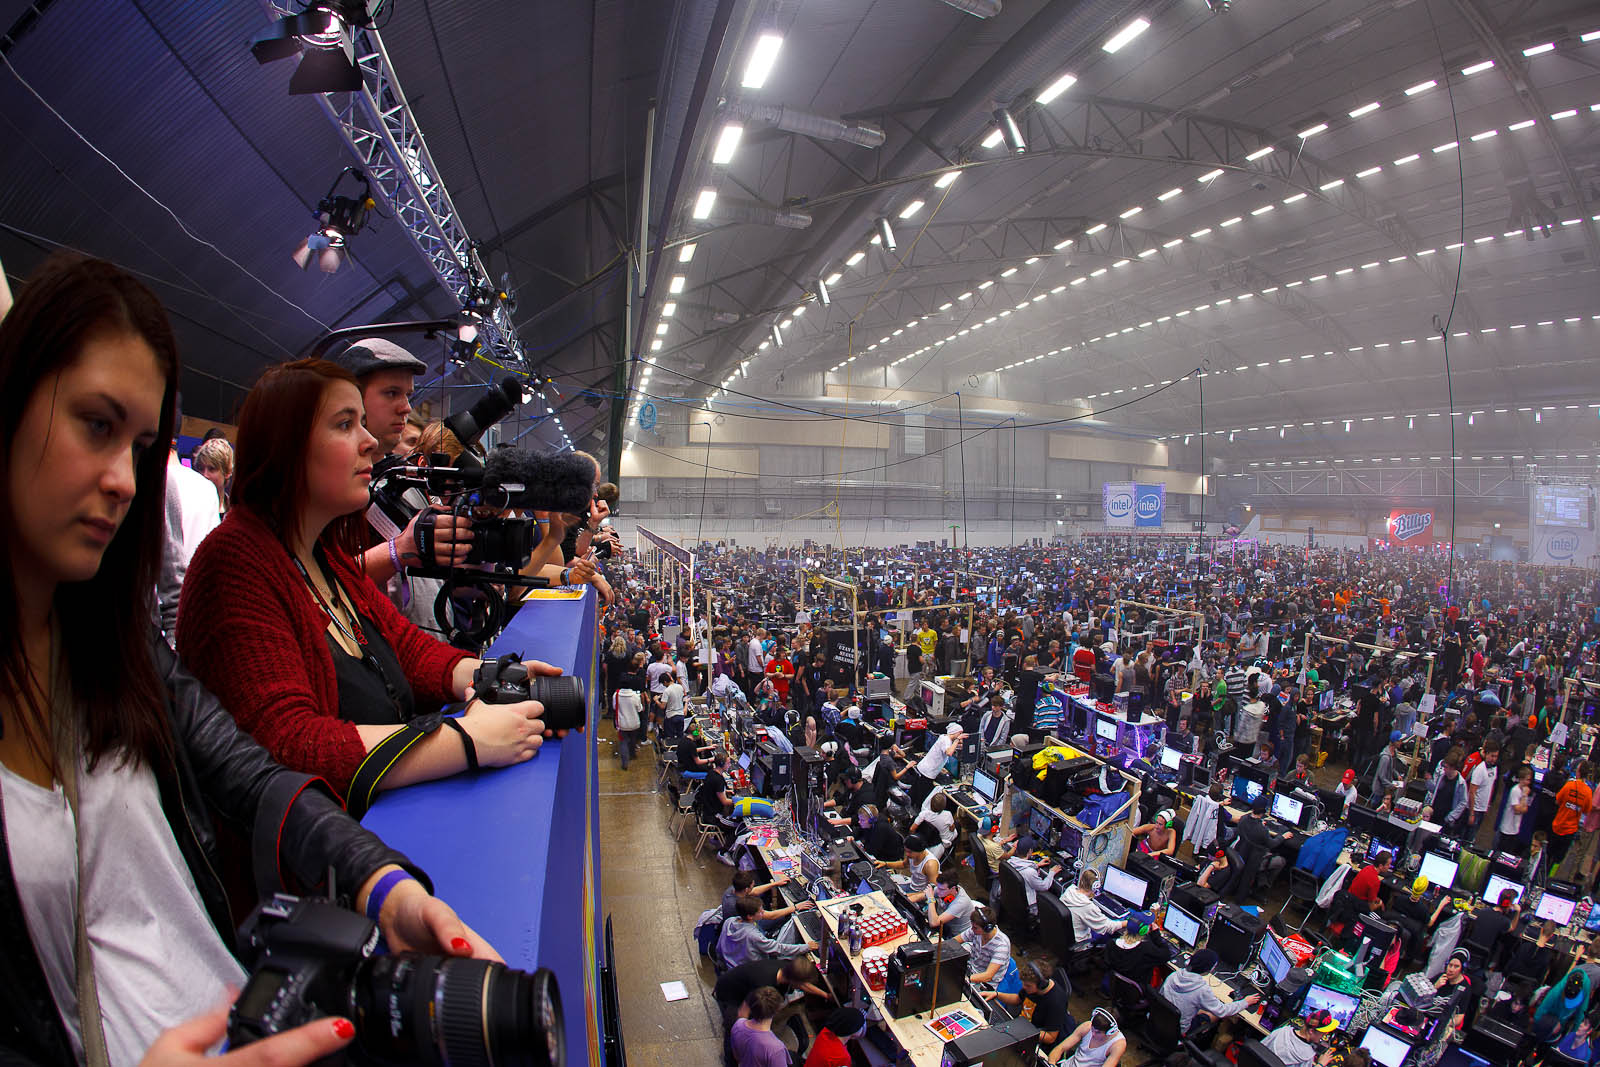 The press booth, DreamHack Winter 2011